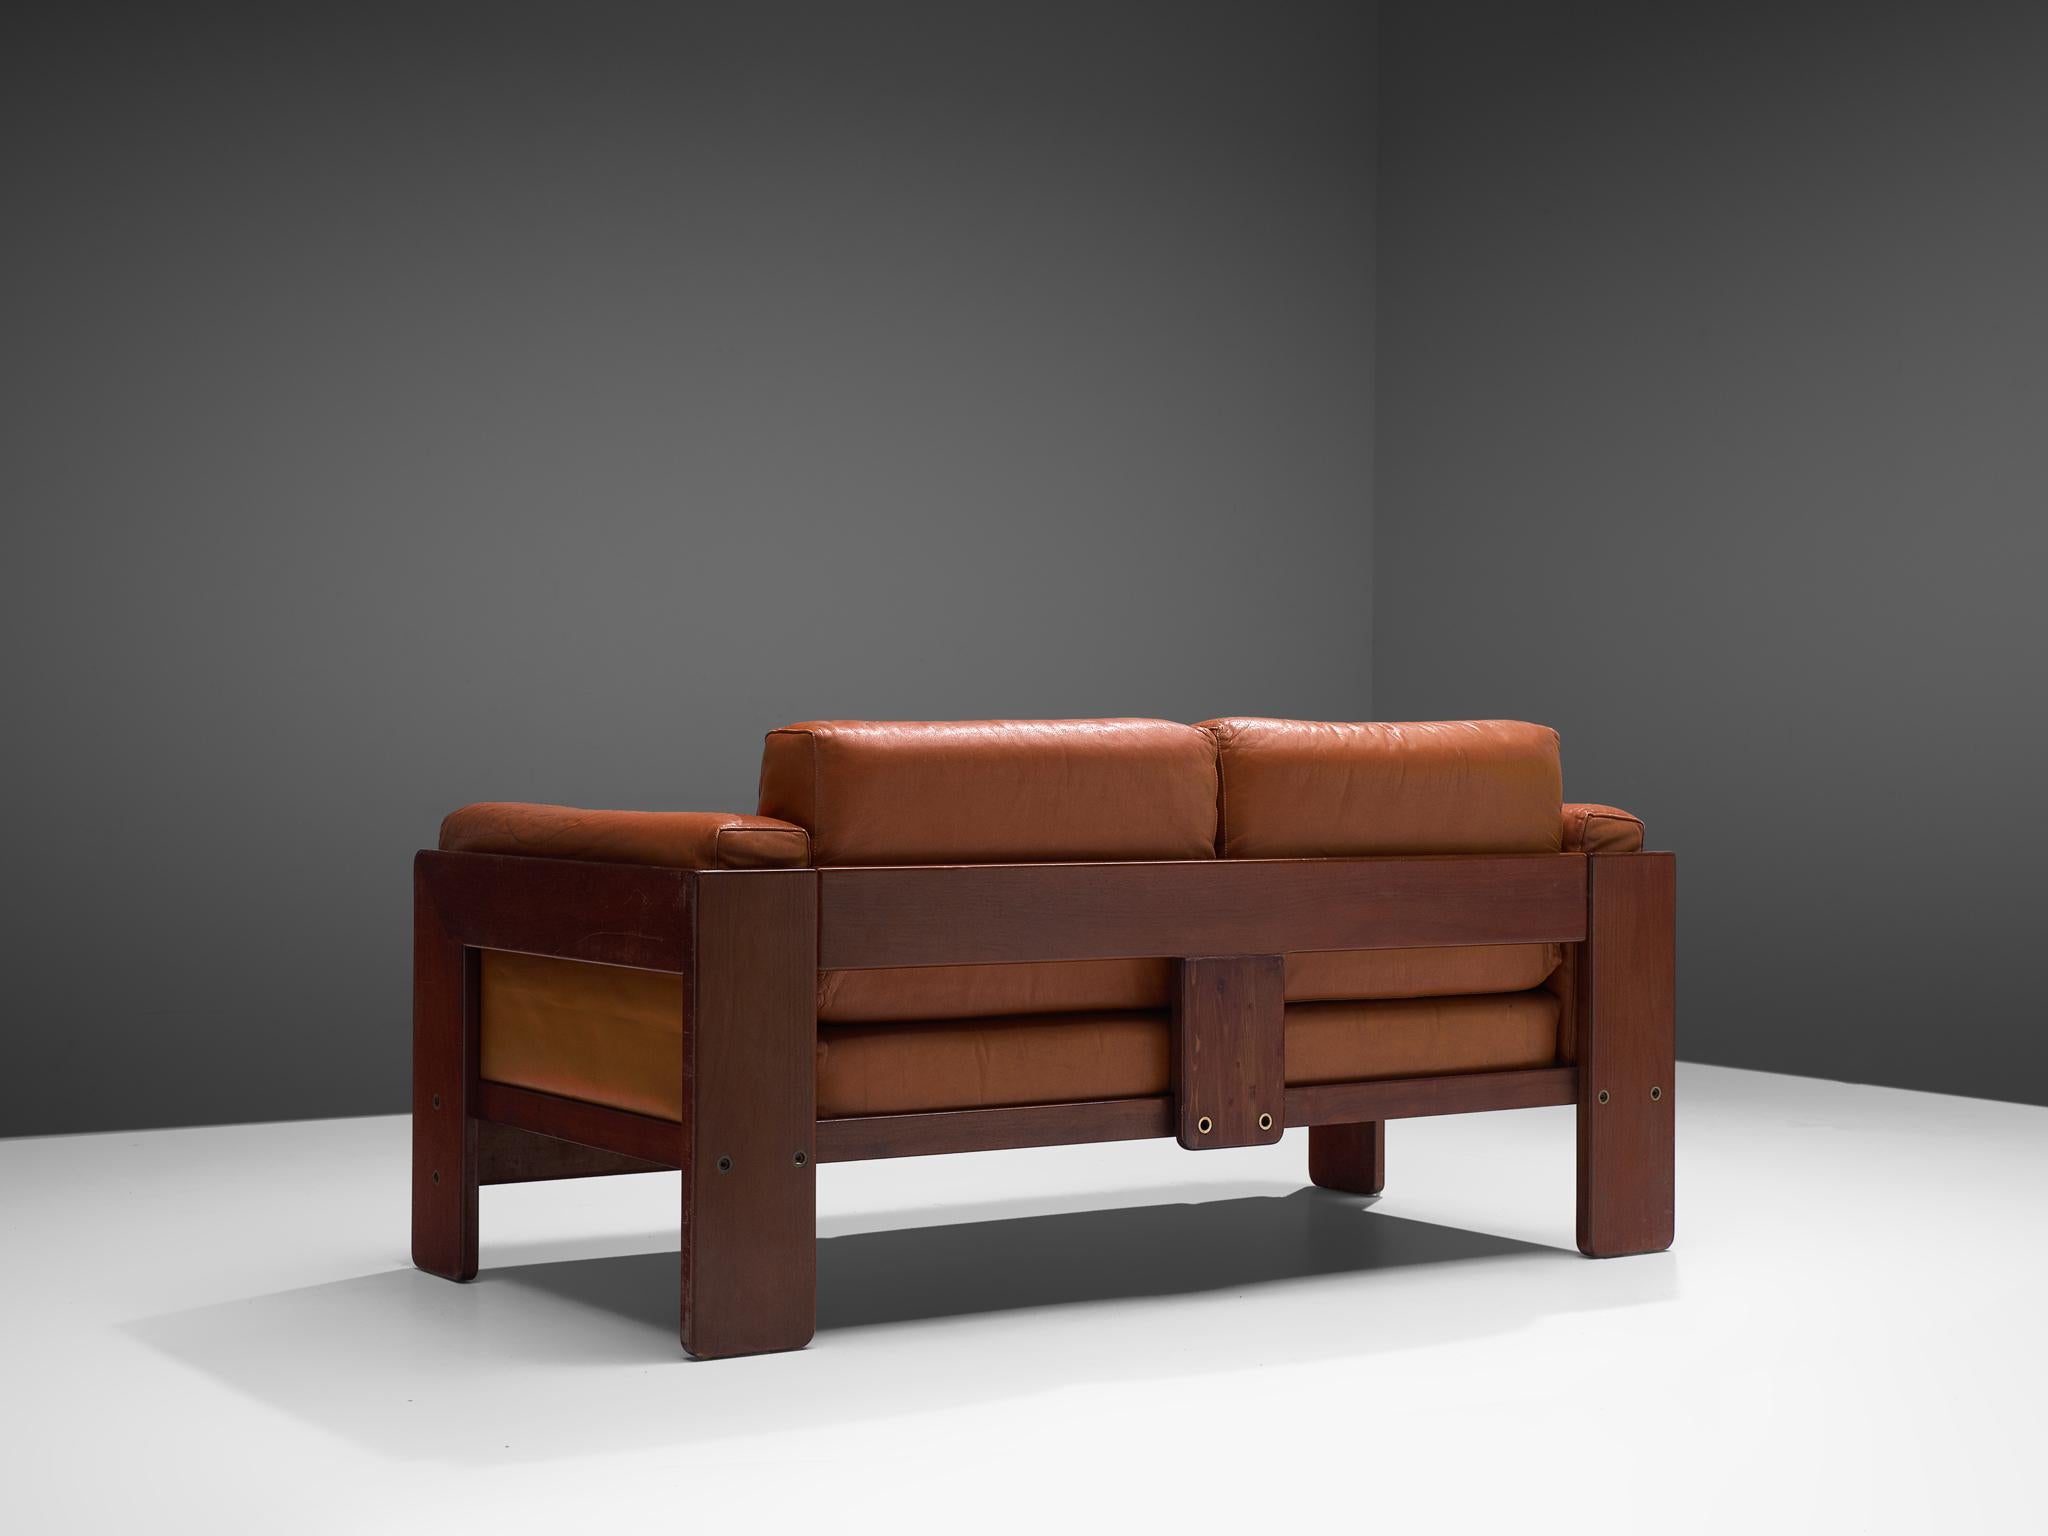 Tobia Scarpa 'Bastiano' Two-Seat Sofa with Cognac Leather 2